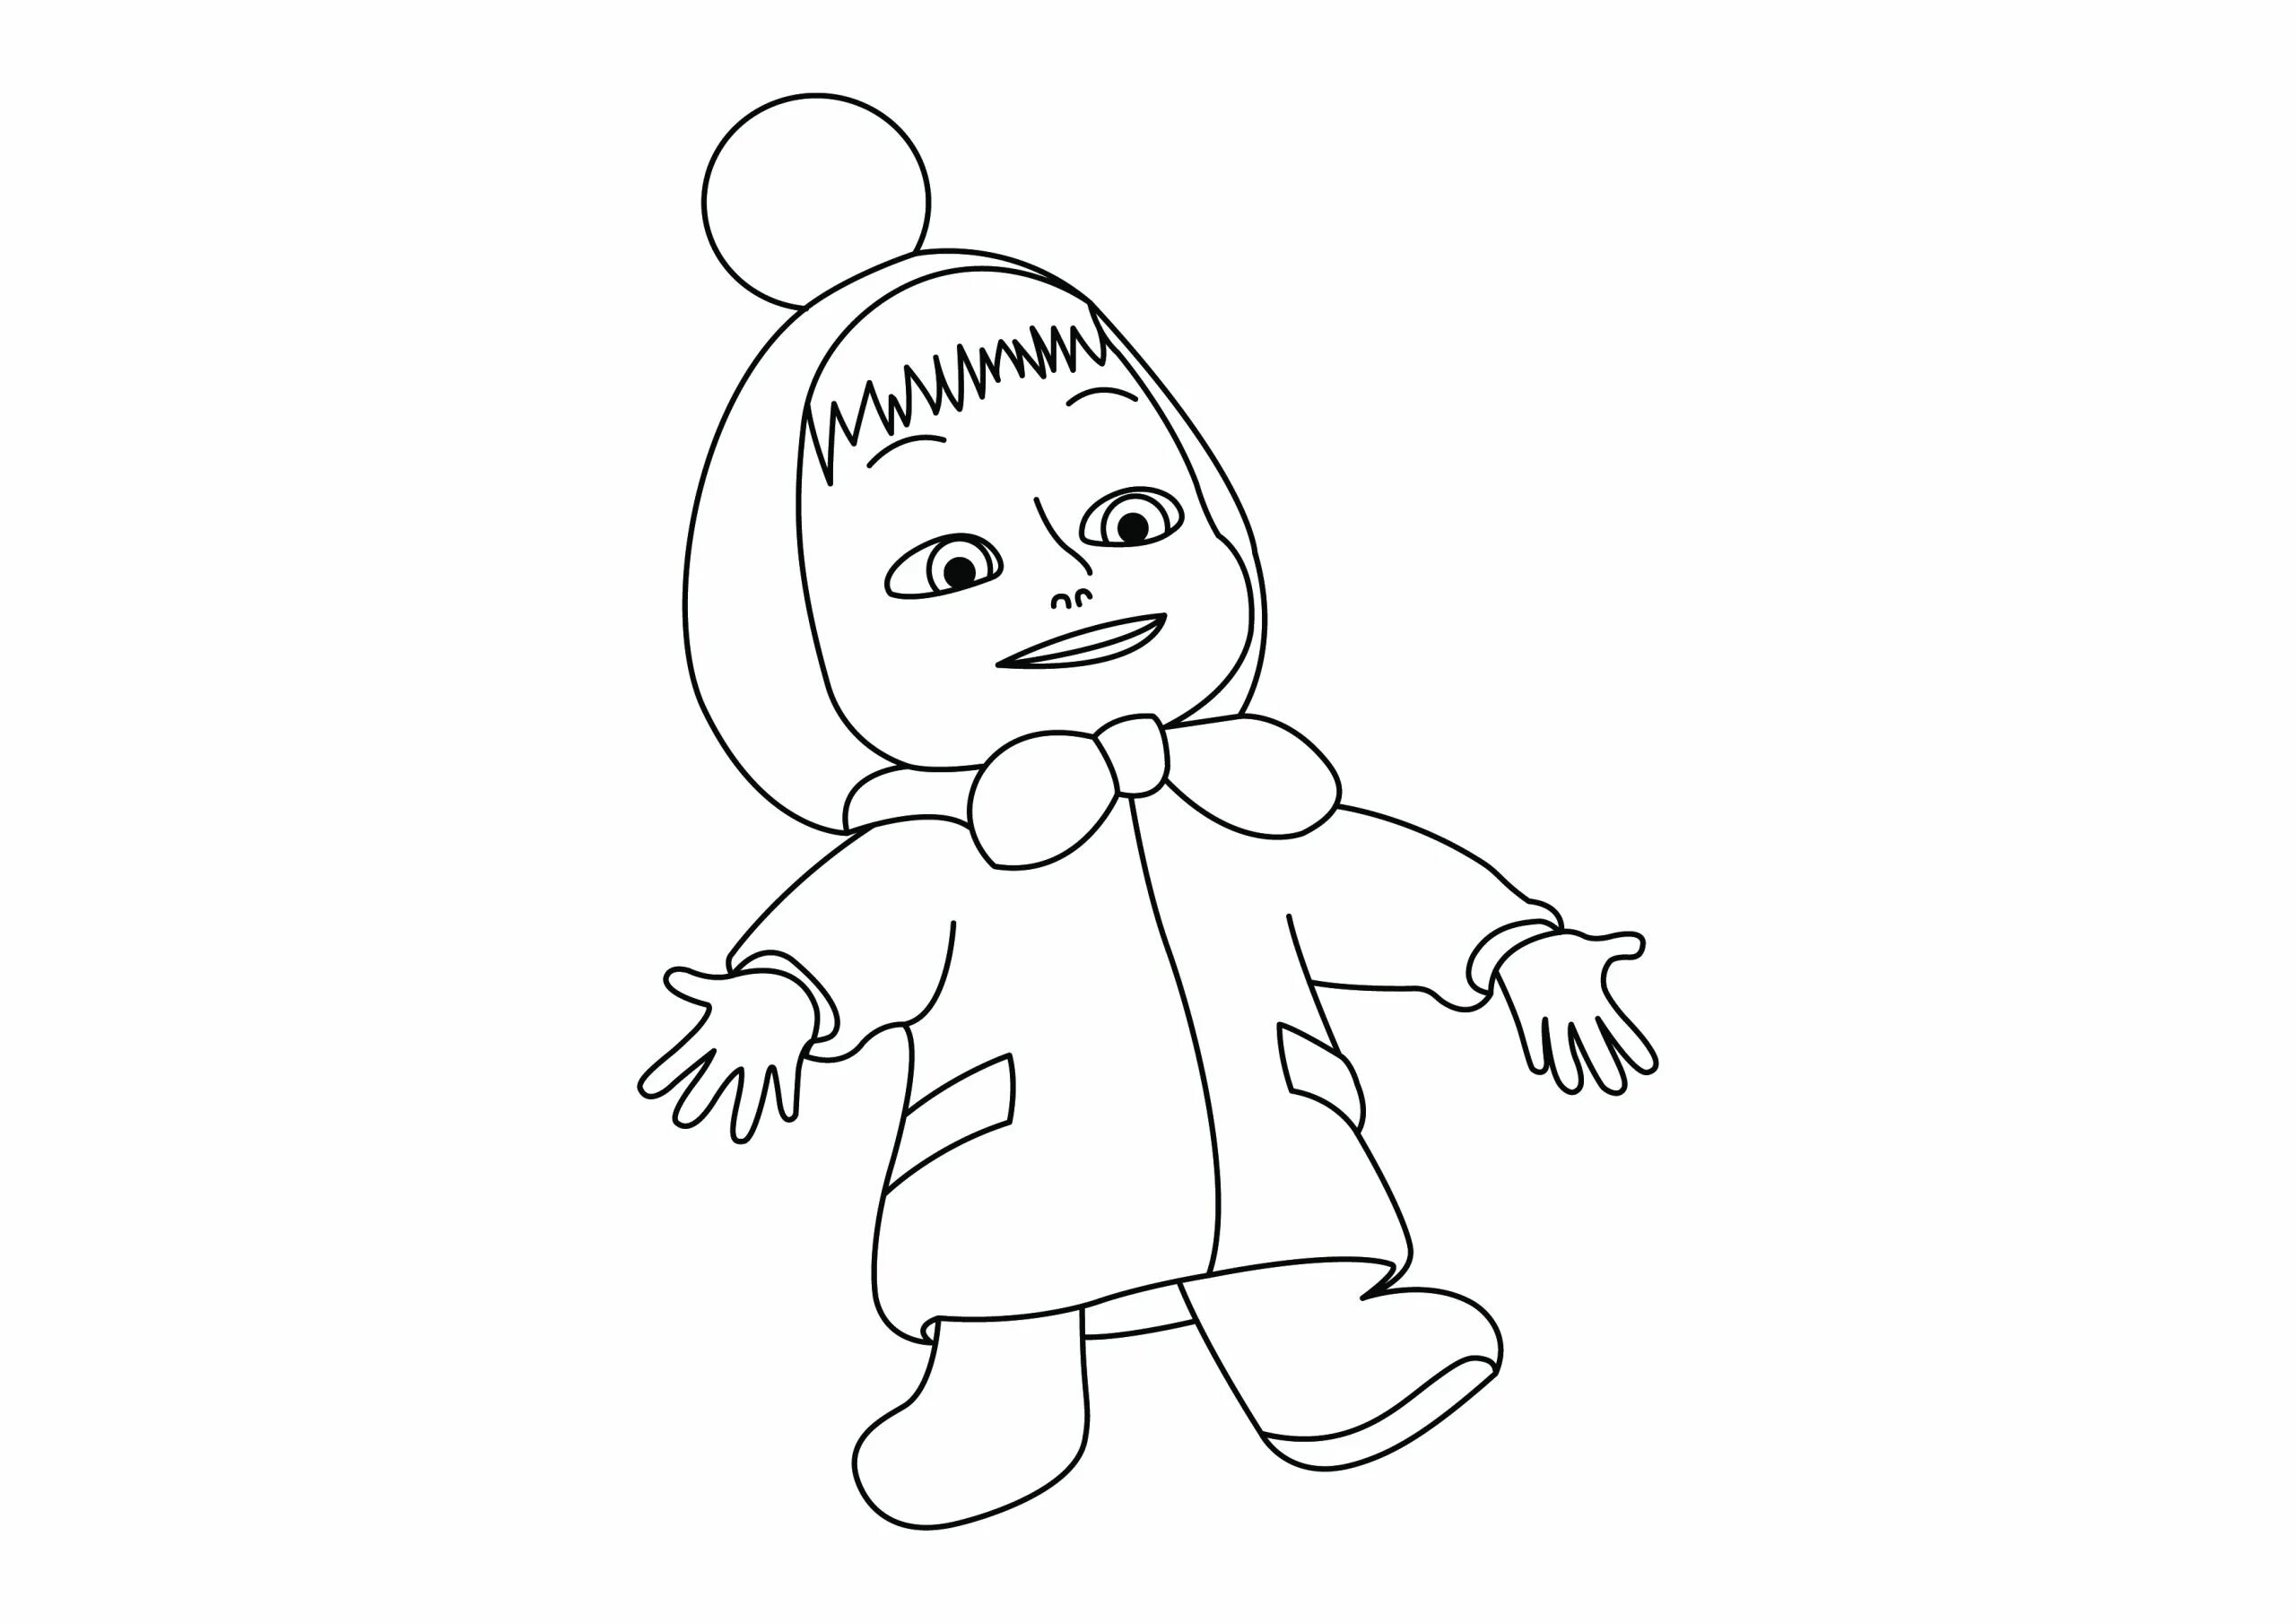 Exciting Masha doll coloring book